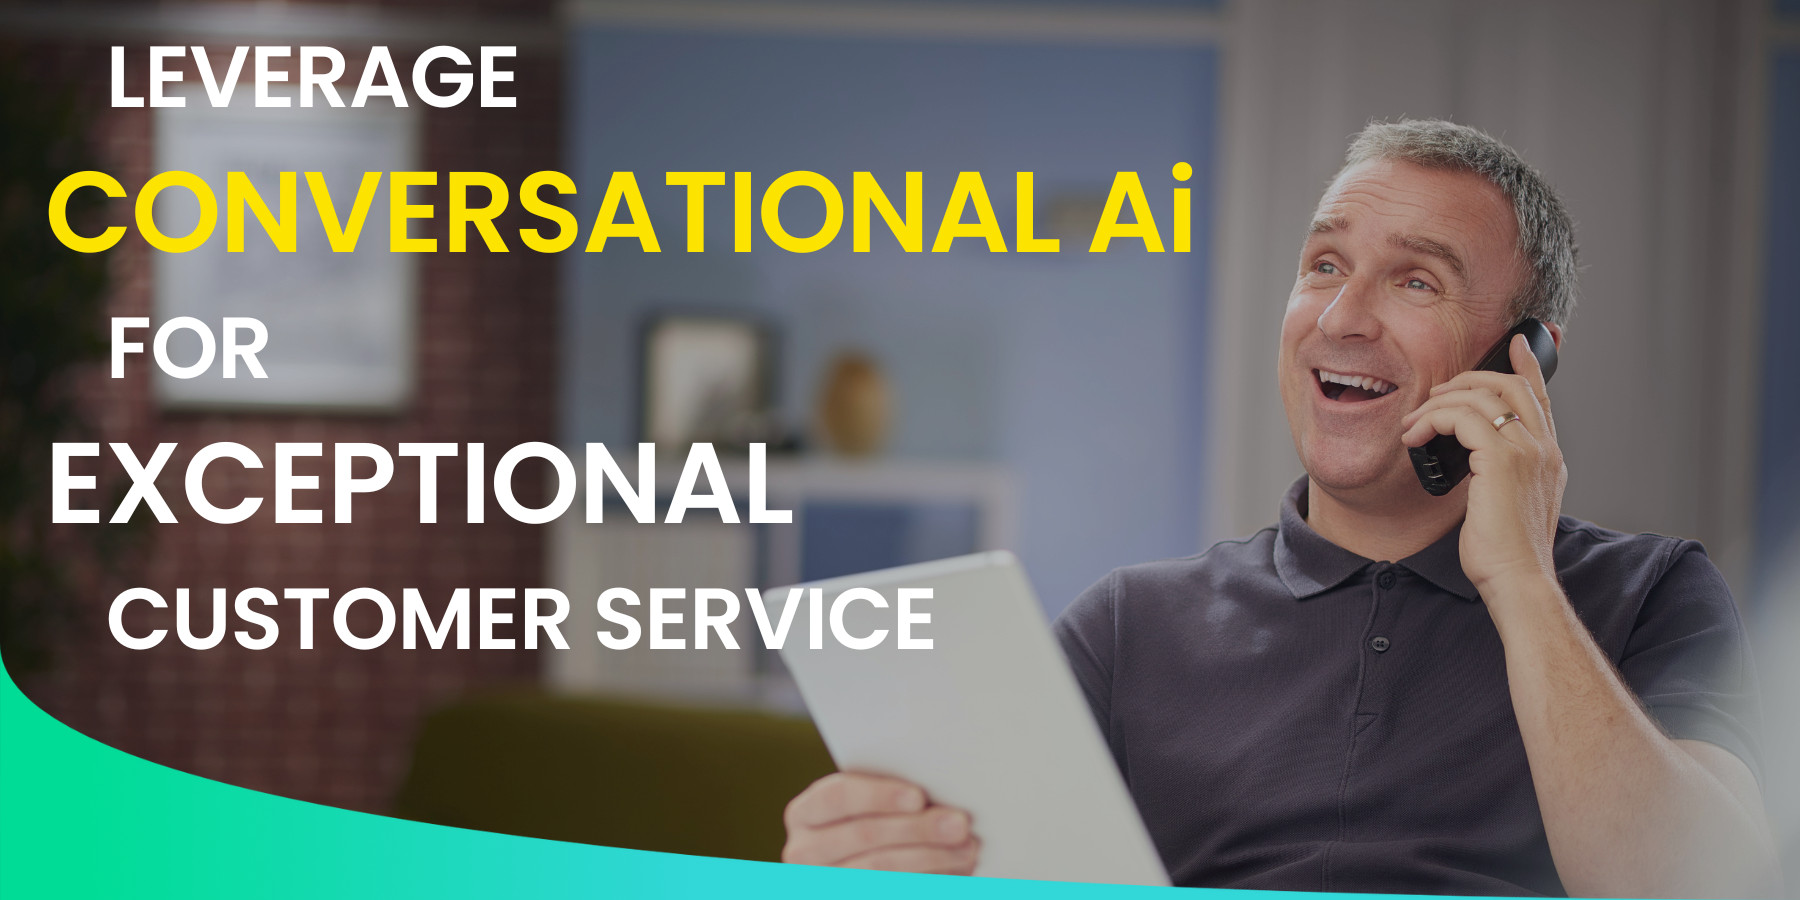 Featured image for “Leverage Conversational Ai For Exceptional Customer Service”